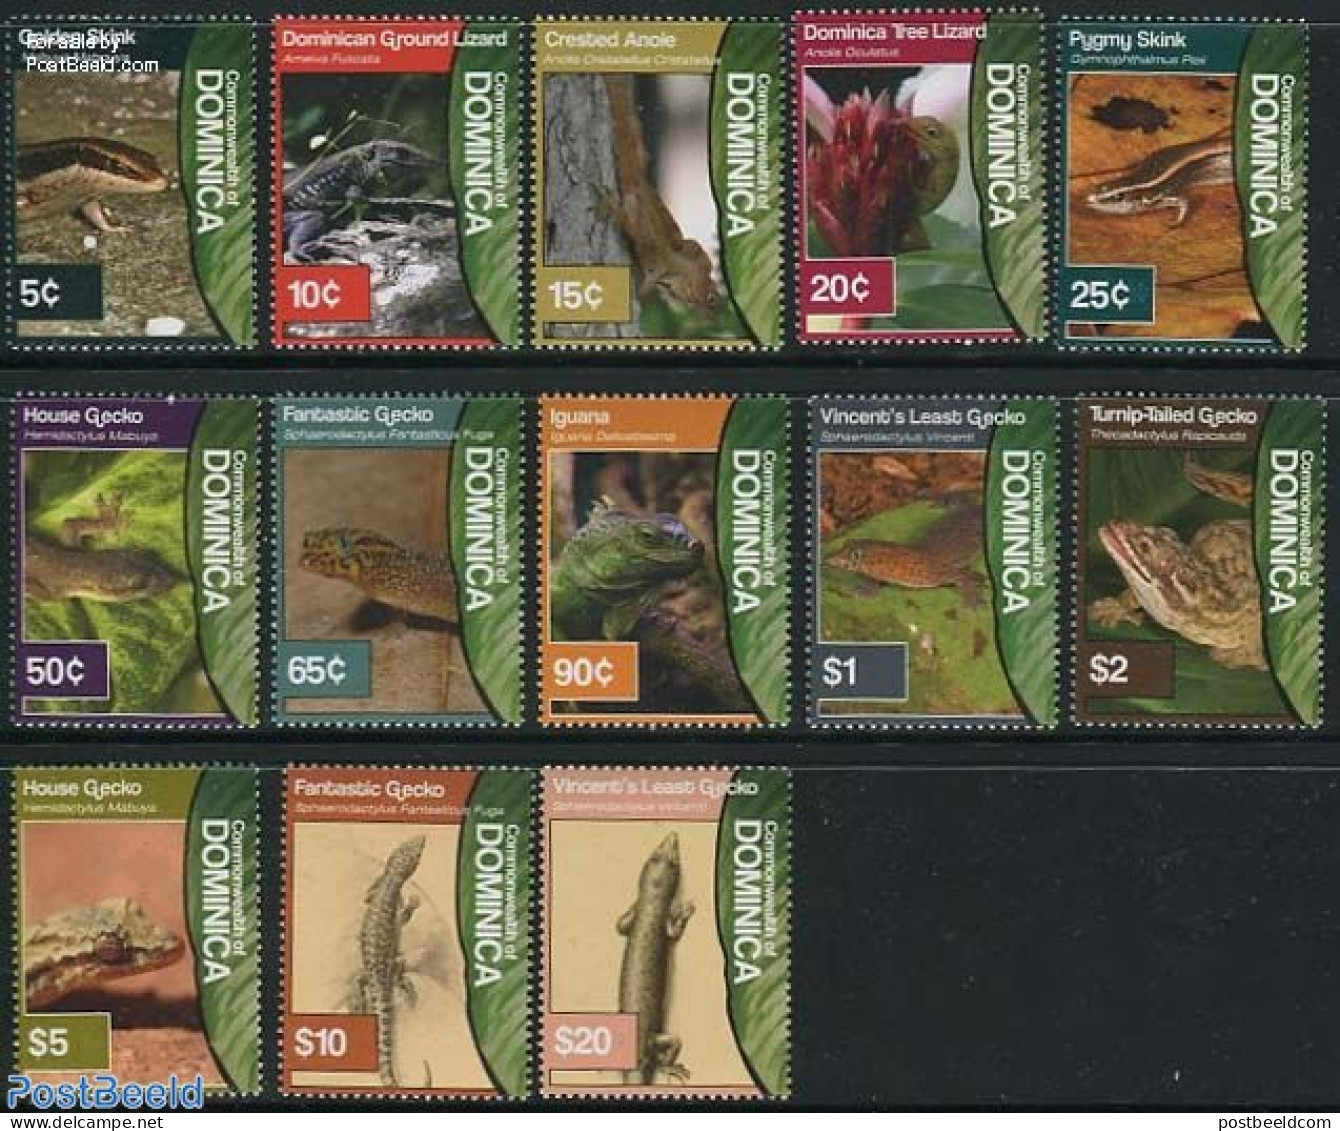 Dominica 2011 Definitives, Skinks, Geckos 13v, Mint NH, Nature - Reptiles - Dominican Republic